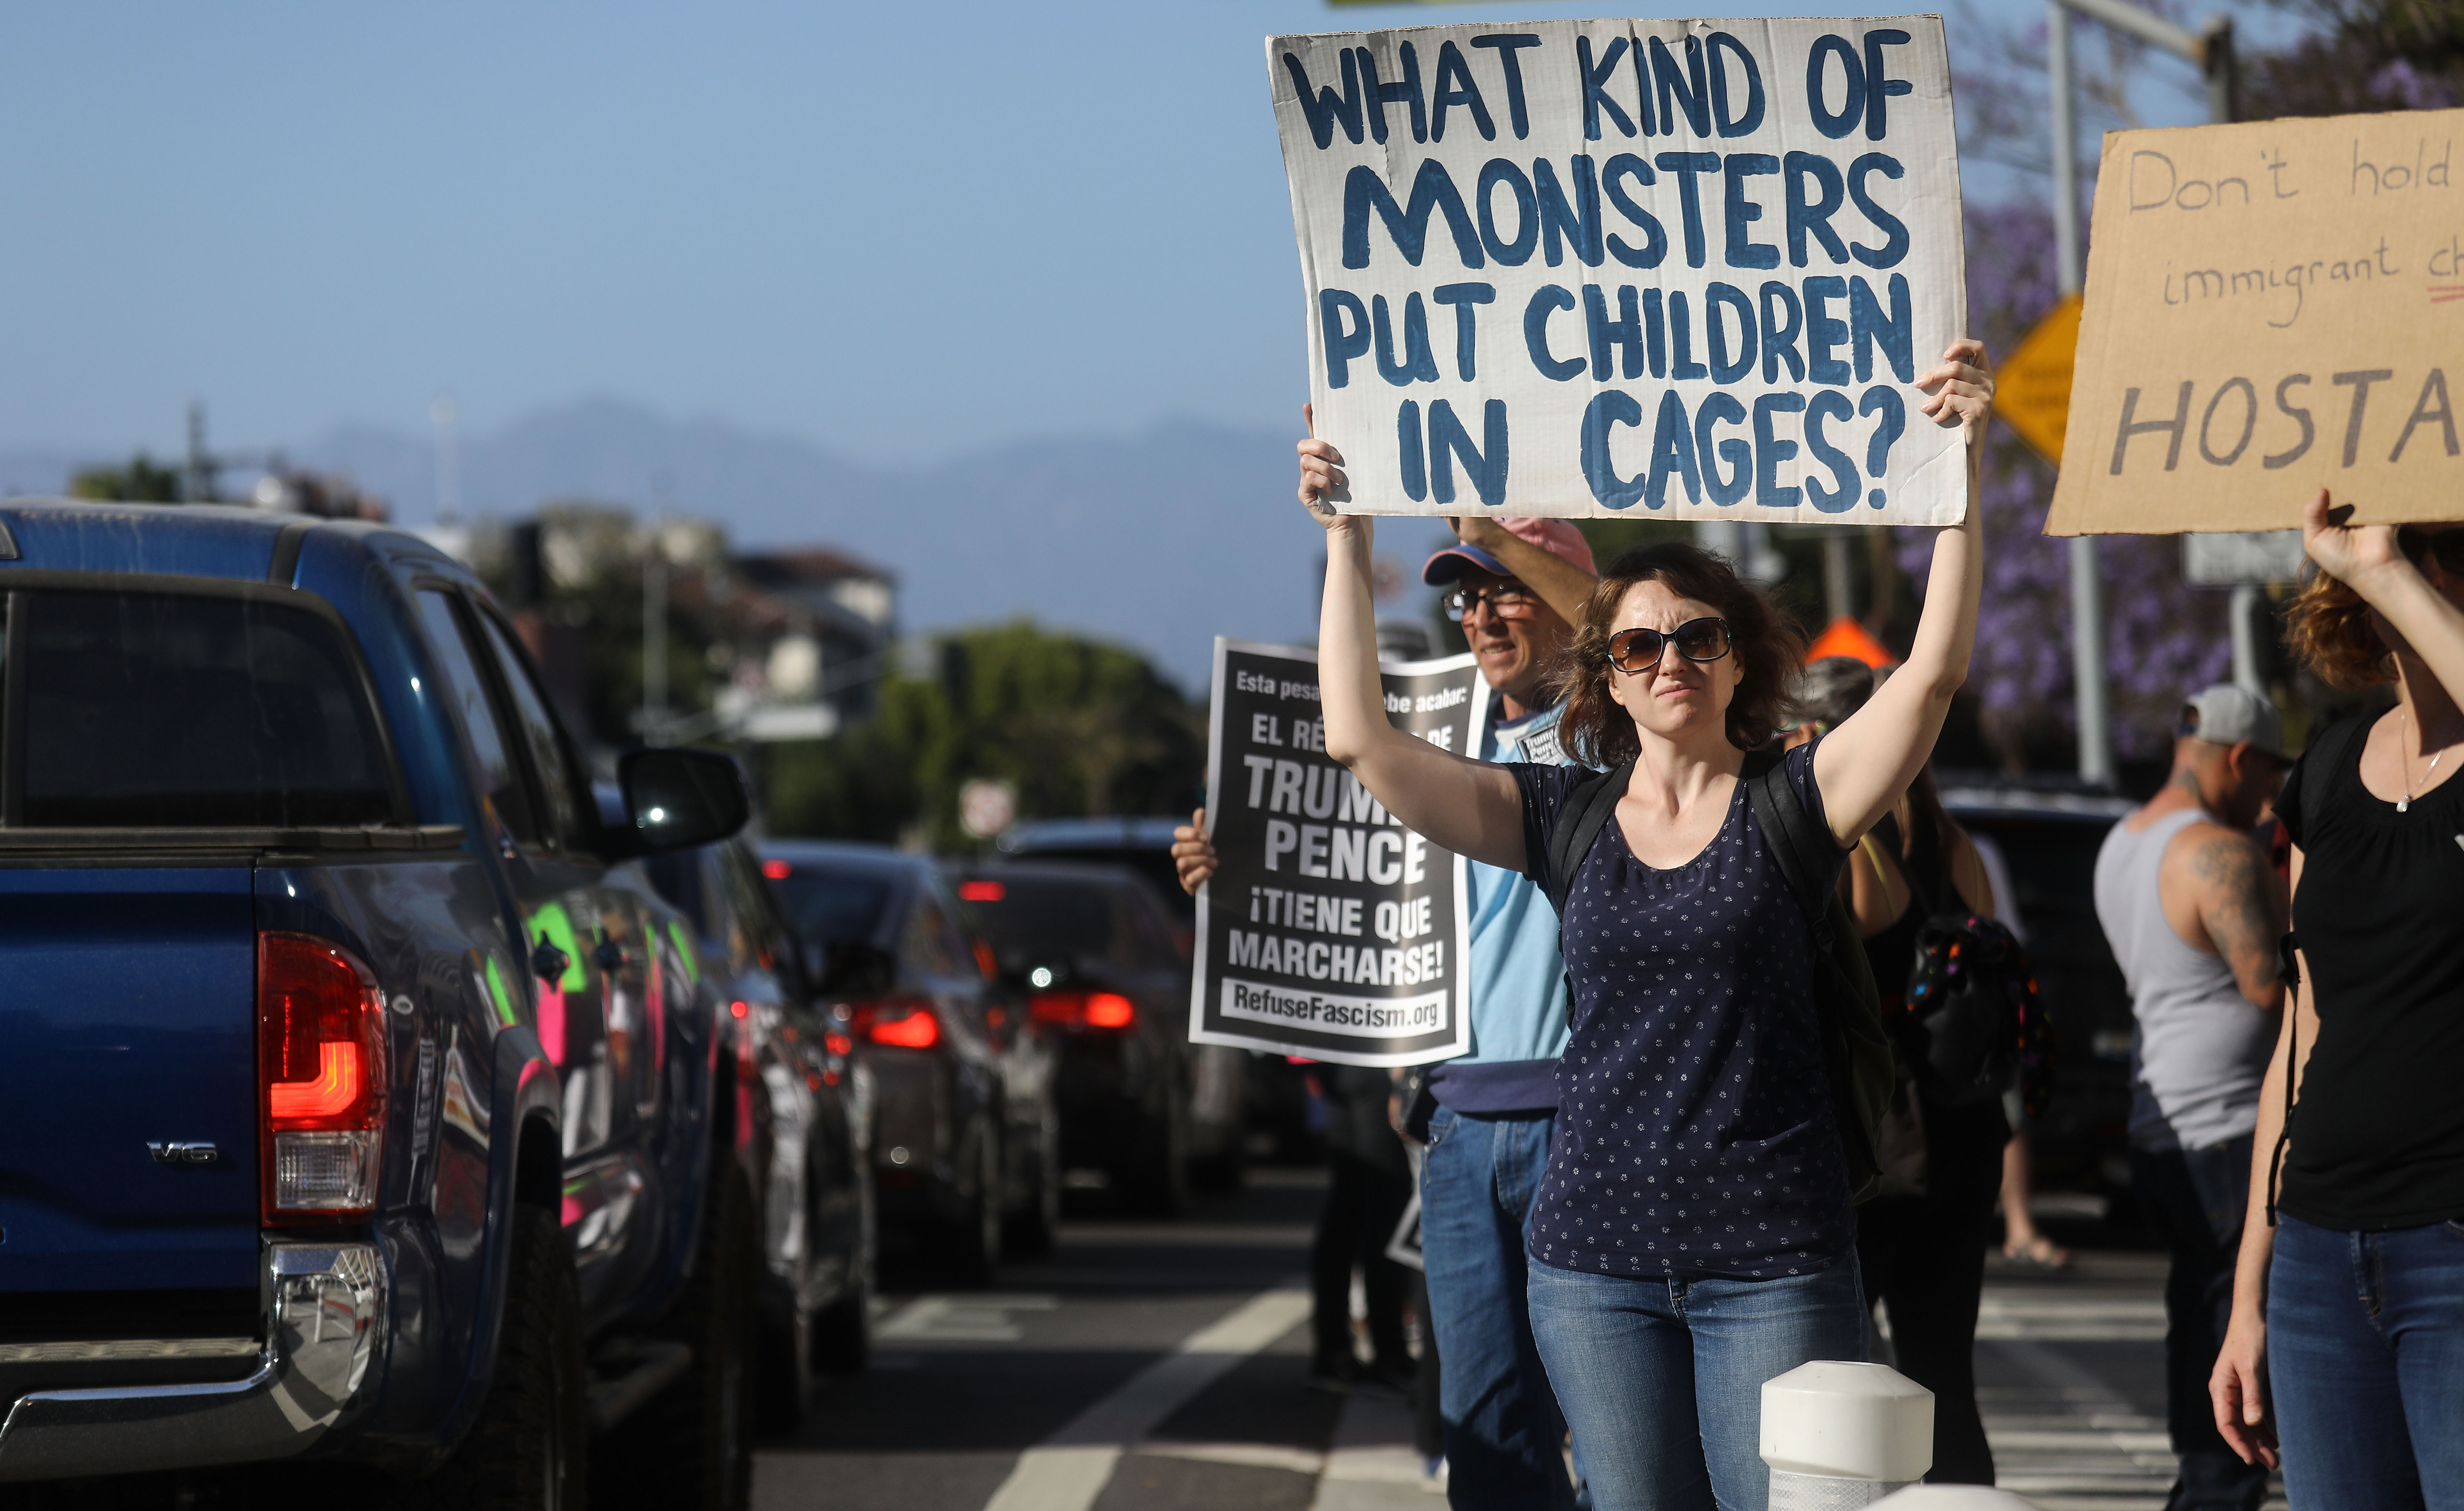 Protestors demonstrate against the separation of migrant children Monday in Los Angeles.